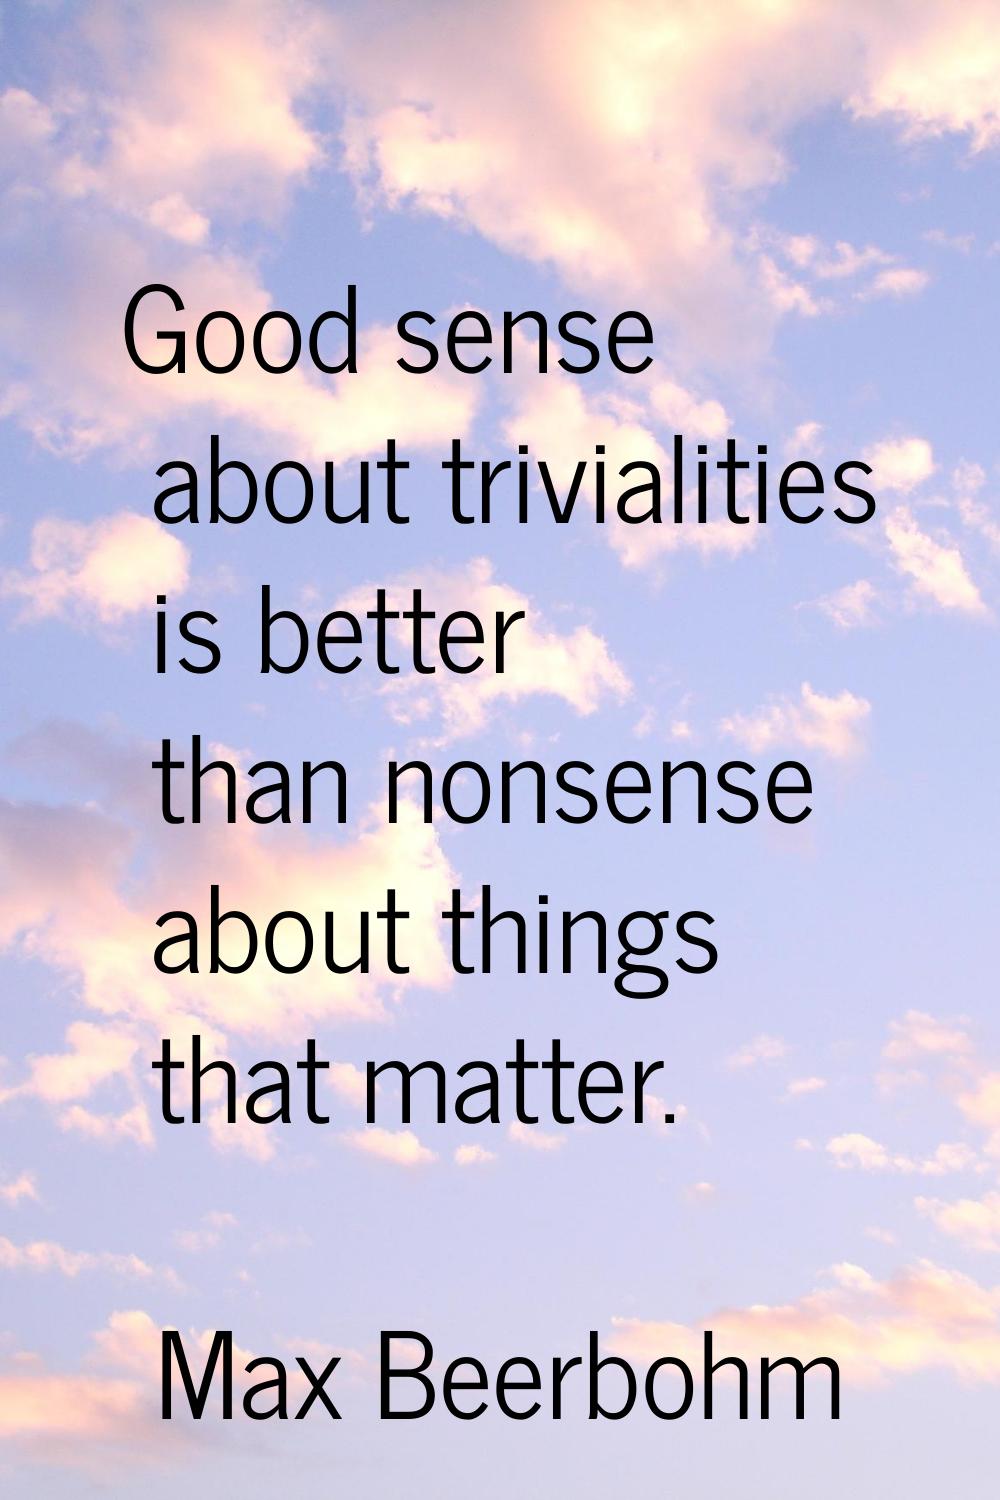 Good sense about trivialities is better than nonsense about things that matter.